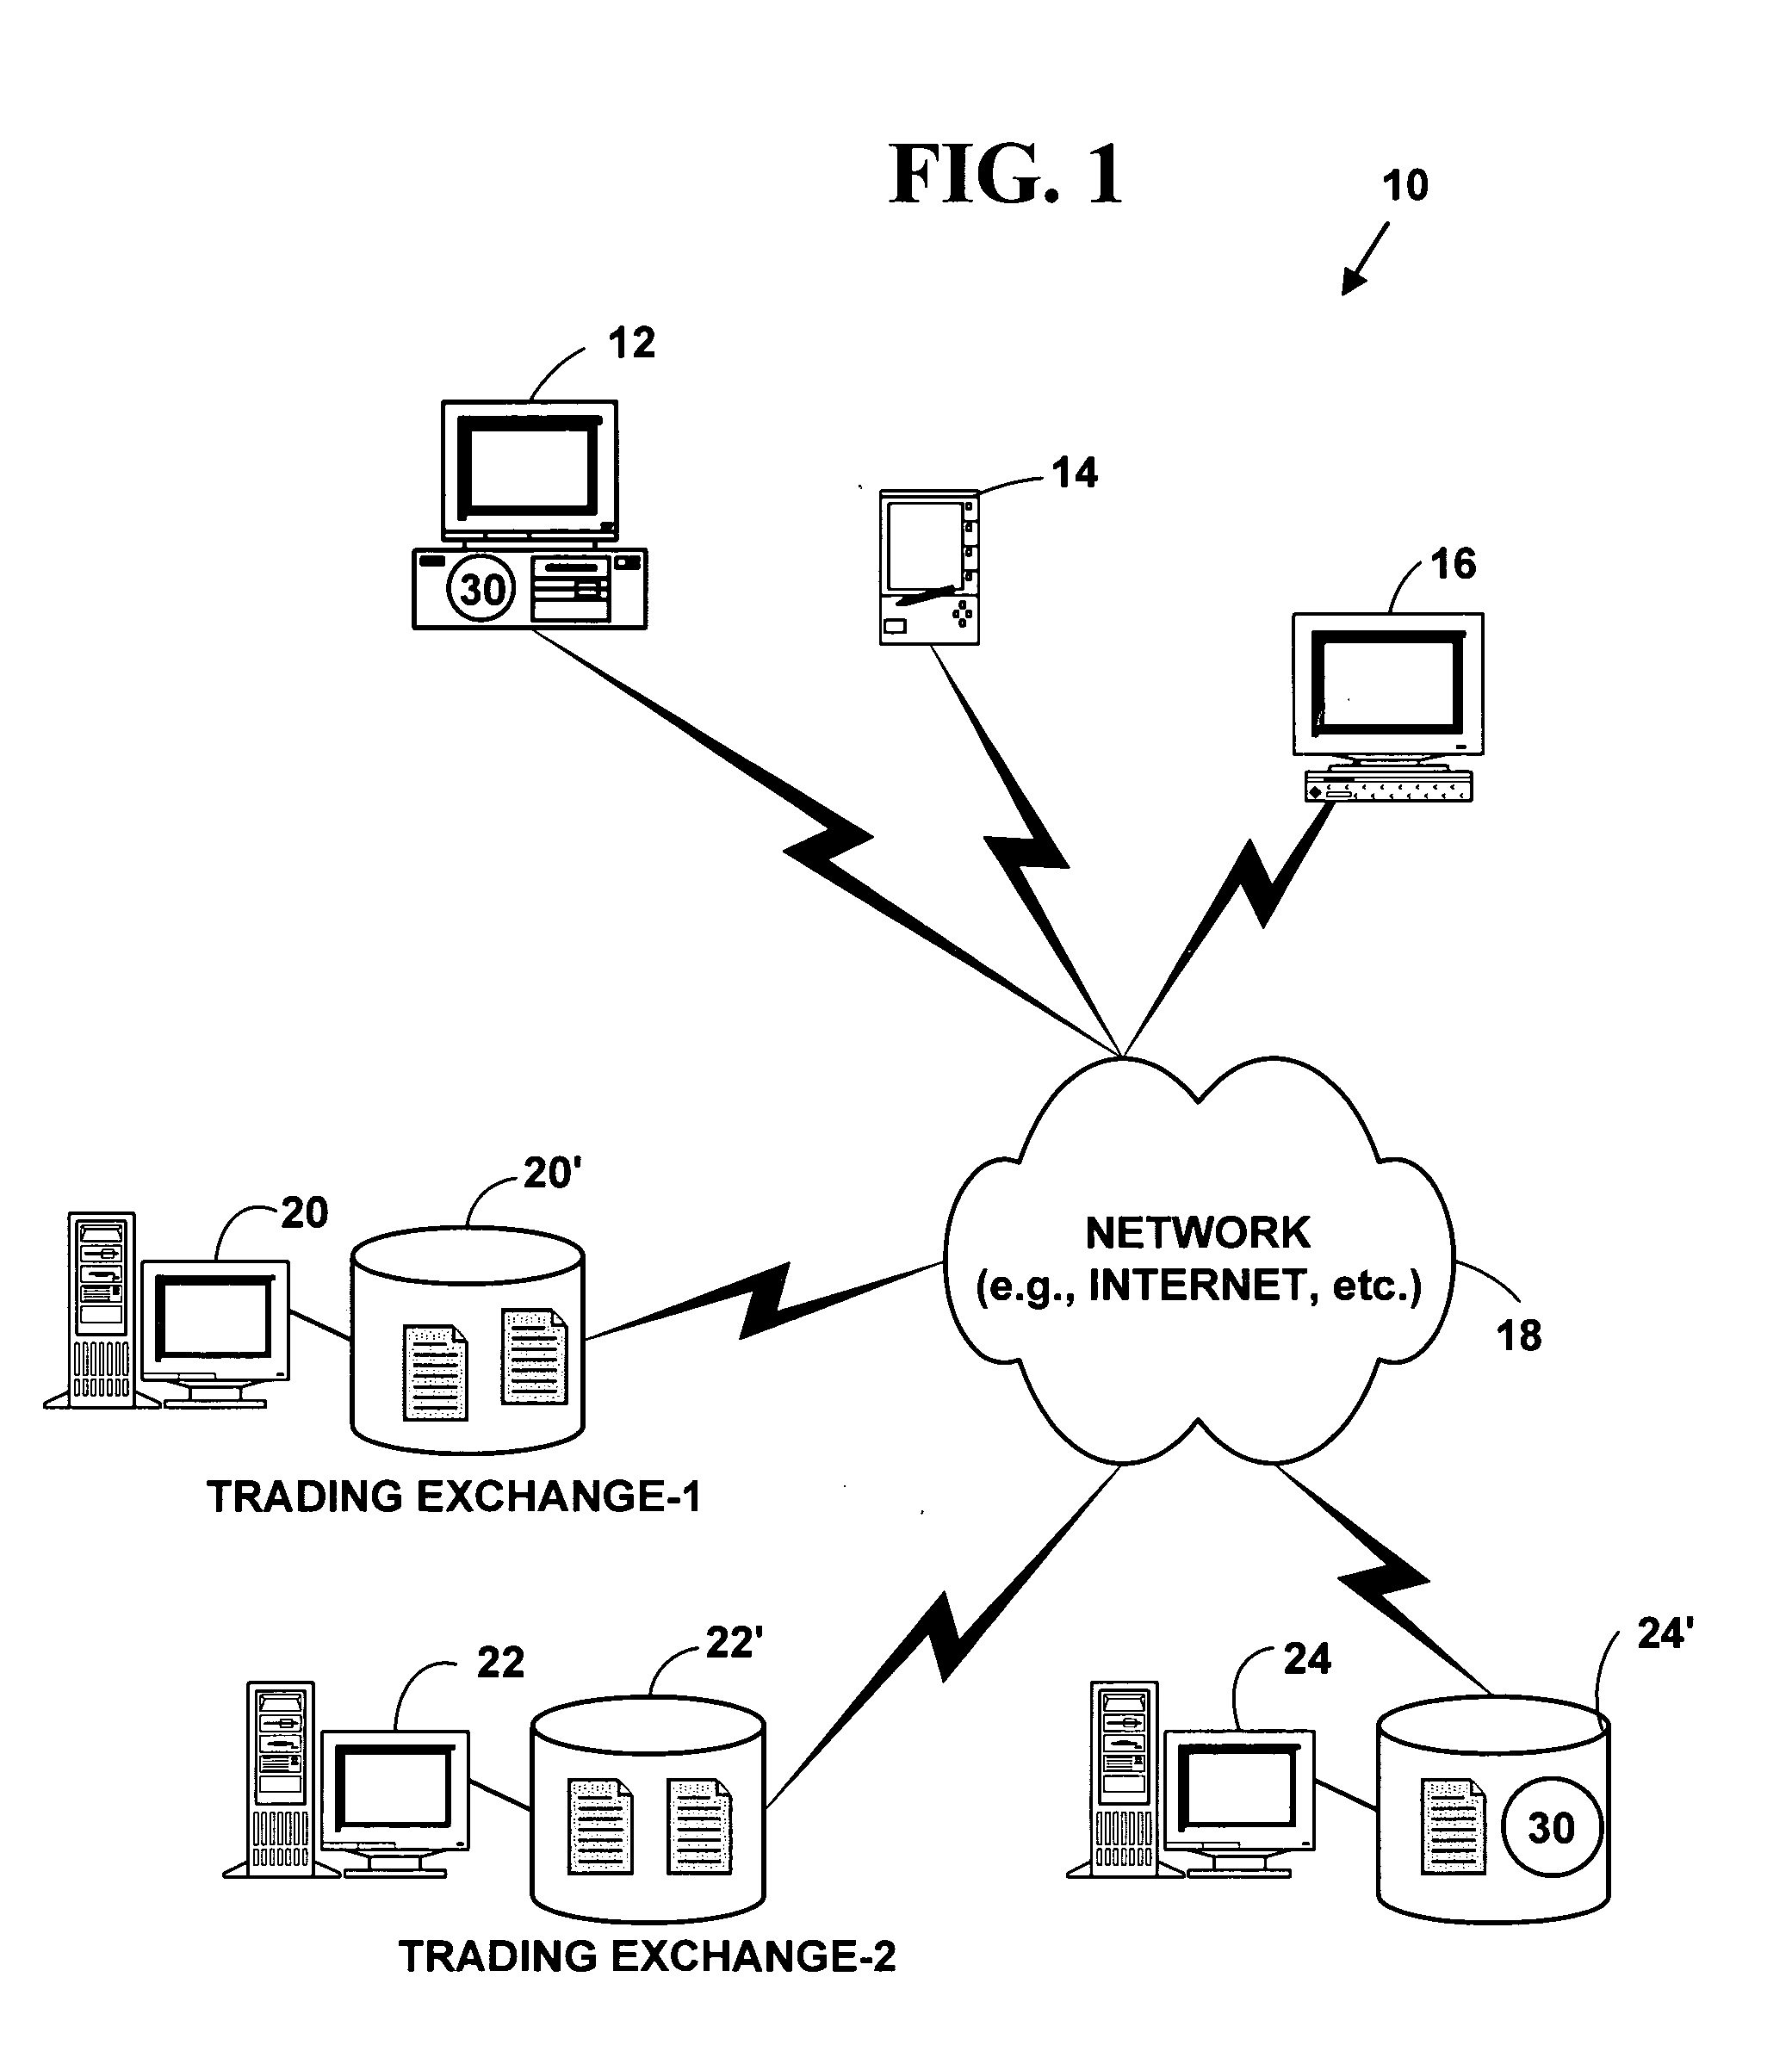 Method and system for providing a graphical user interface for electronic trading